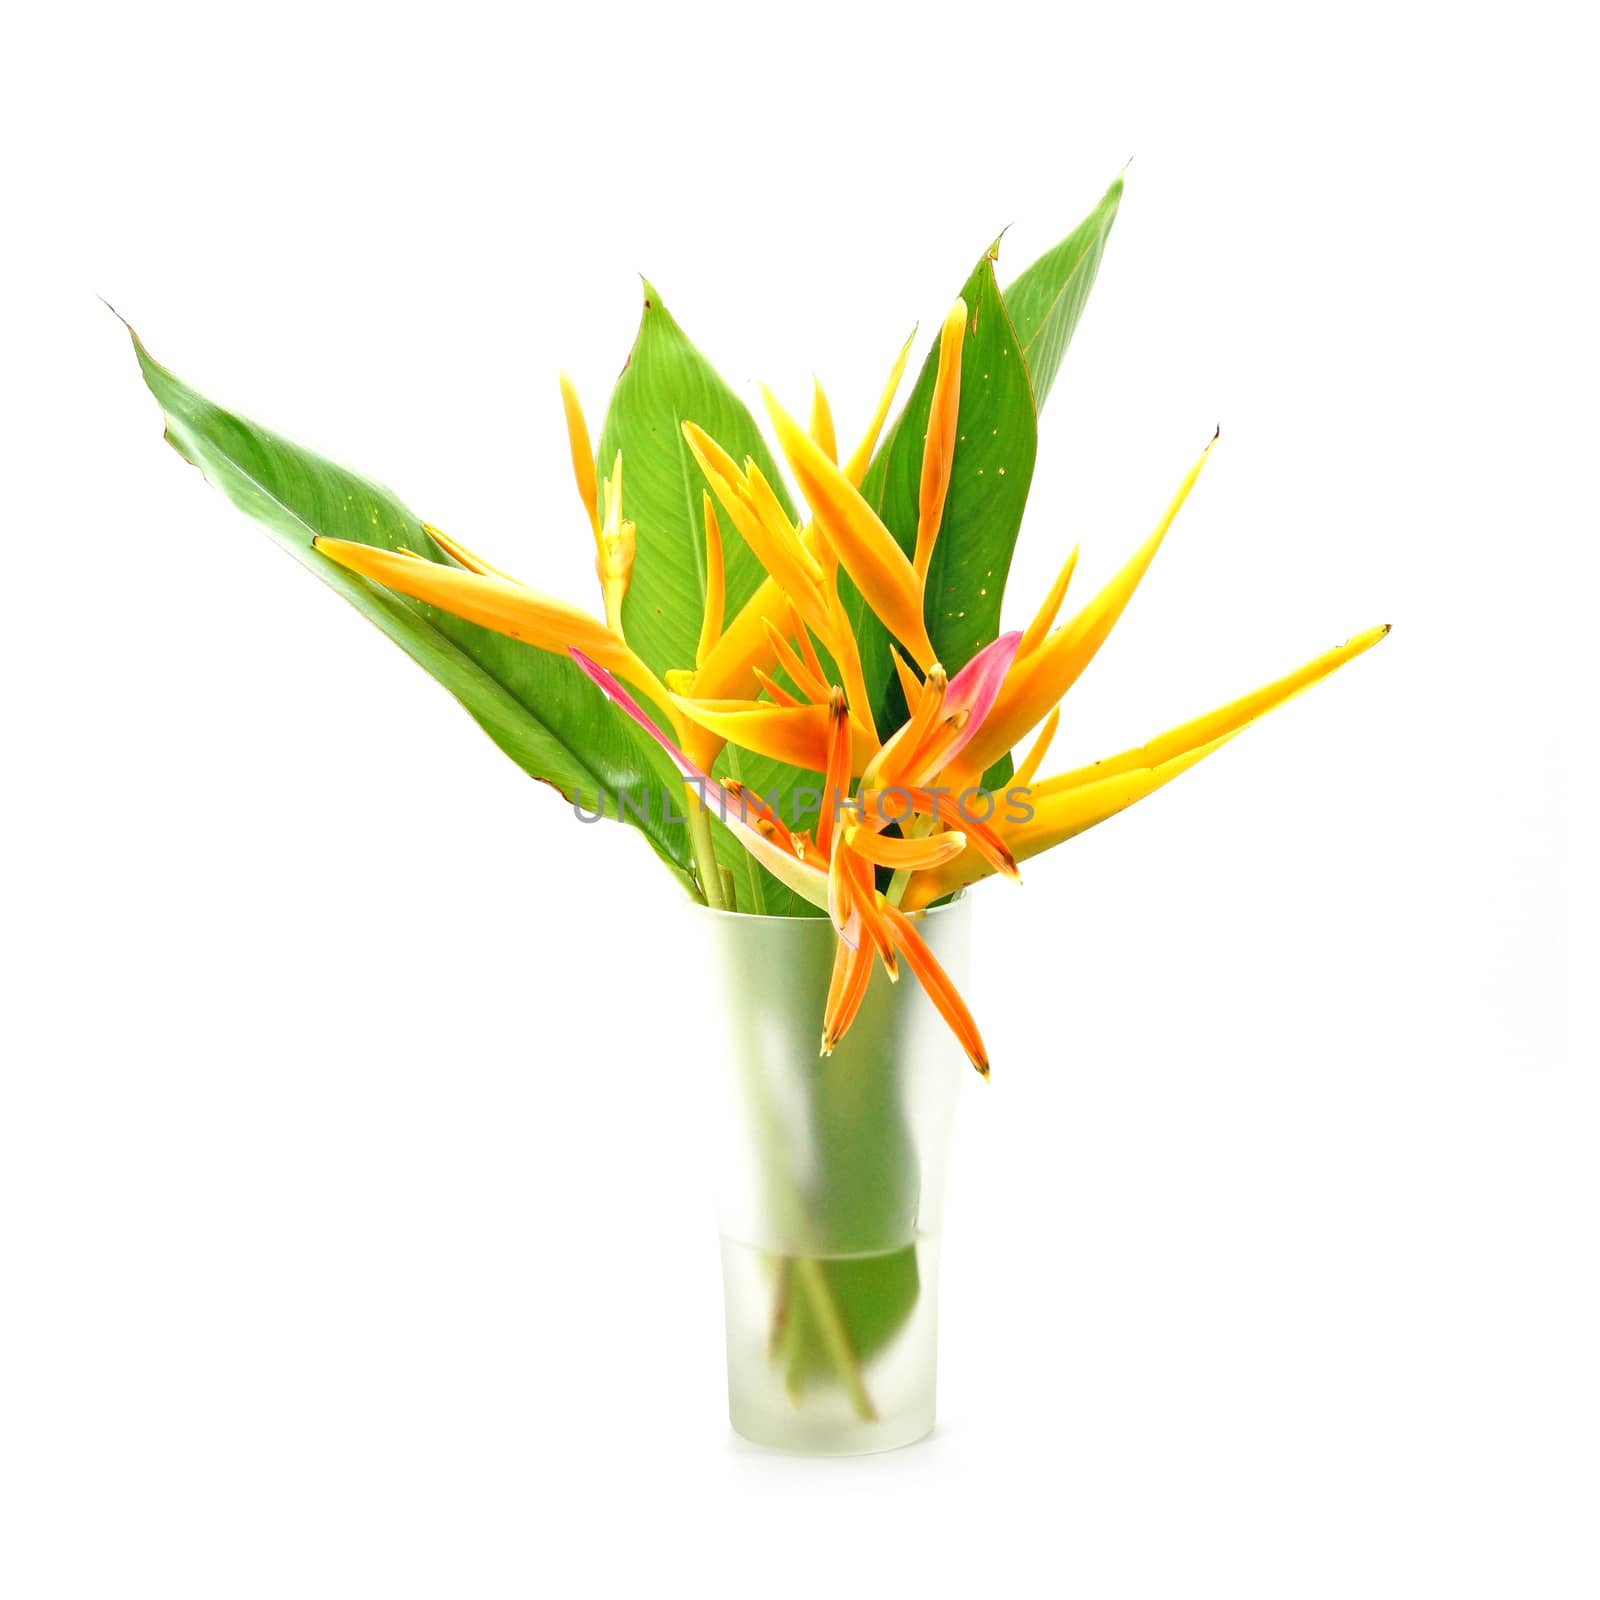 Beautiful Heliconia flower blooming isolated on white background by Noppharat_th